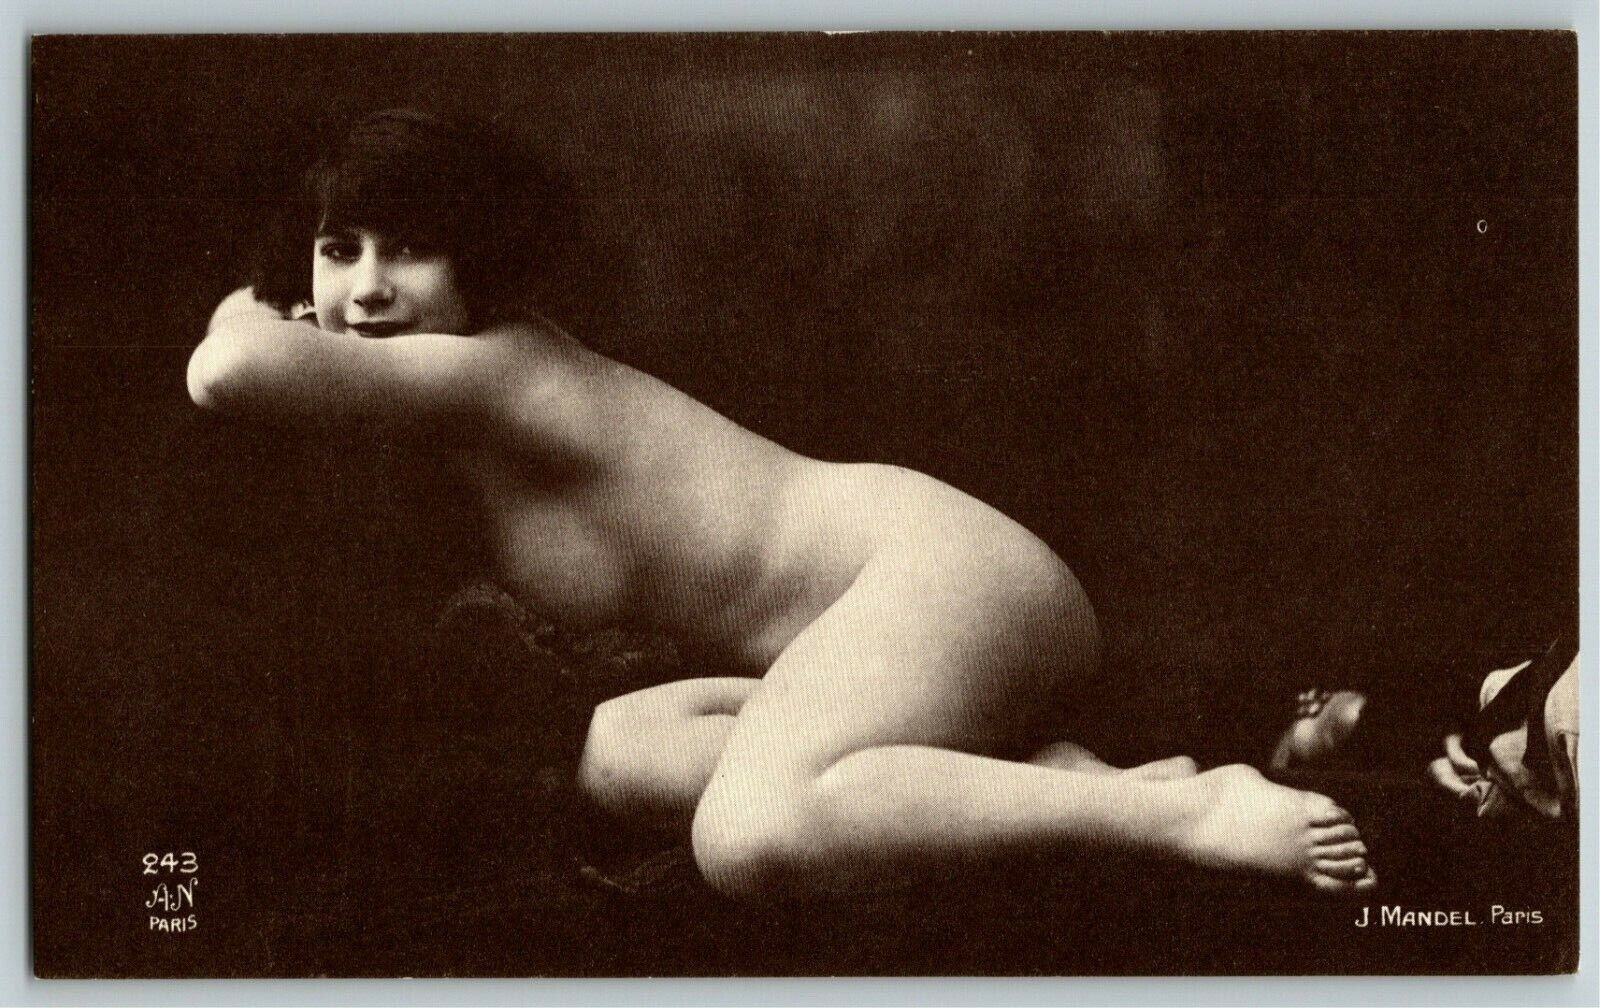 NOS Nude J. Mandel Reproduction French Carte Postale Postcard AN 243       (#26)